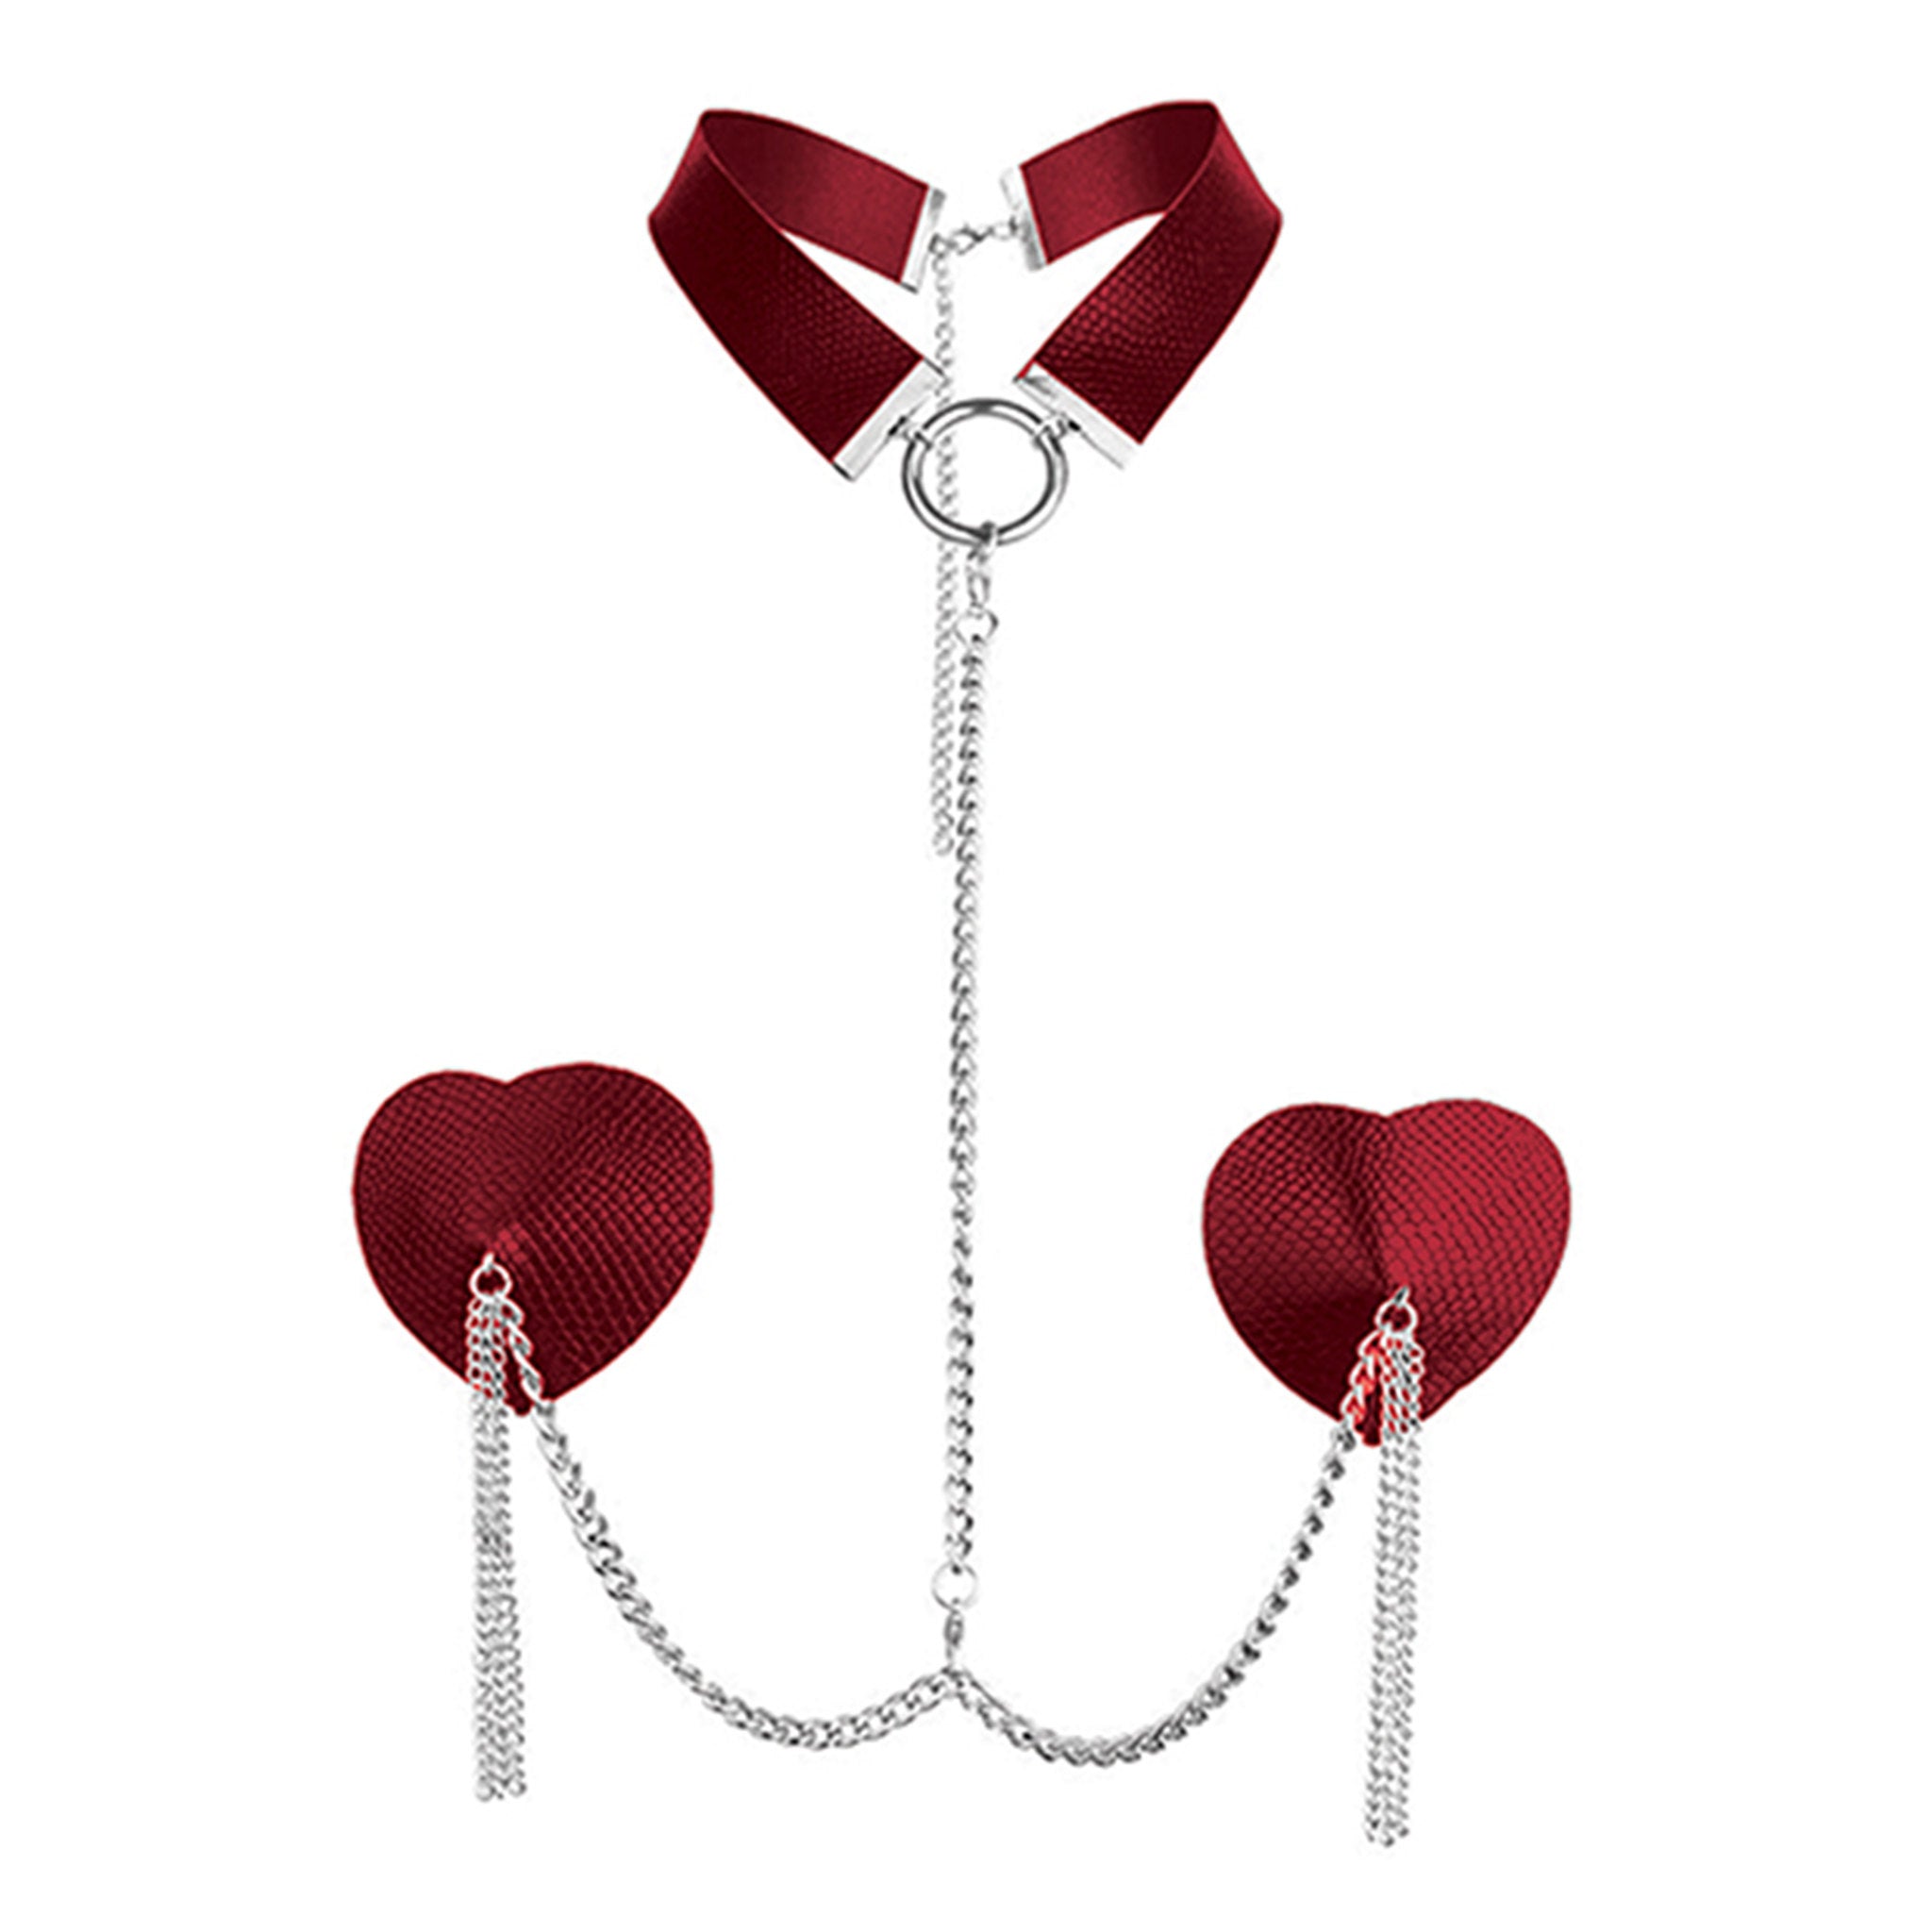 Hanging Chains Leather Collar & Heart Pasties